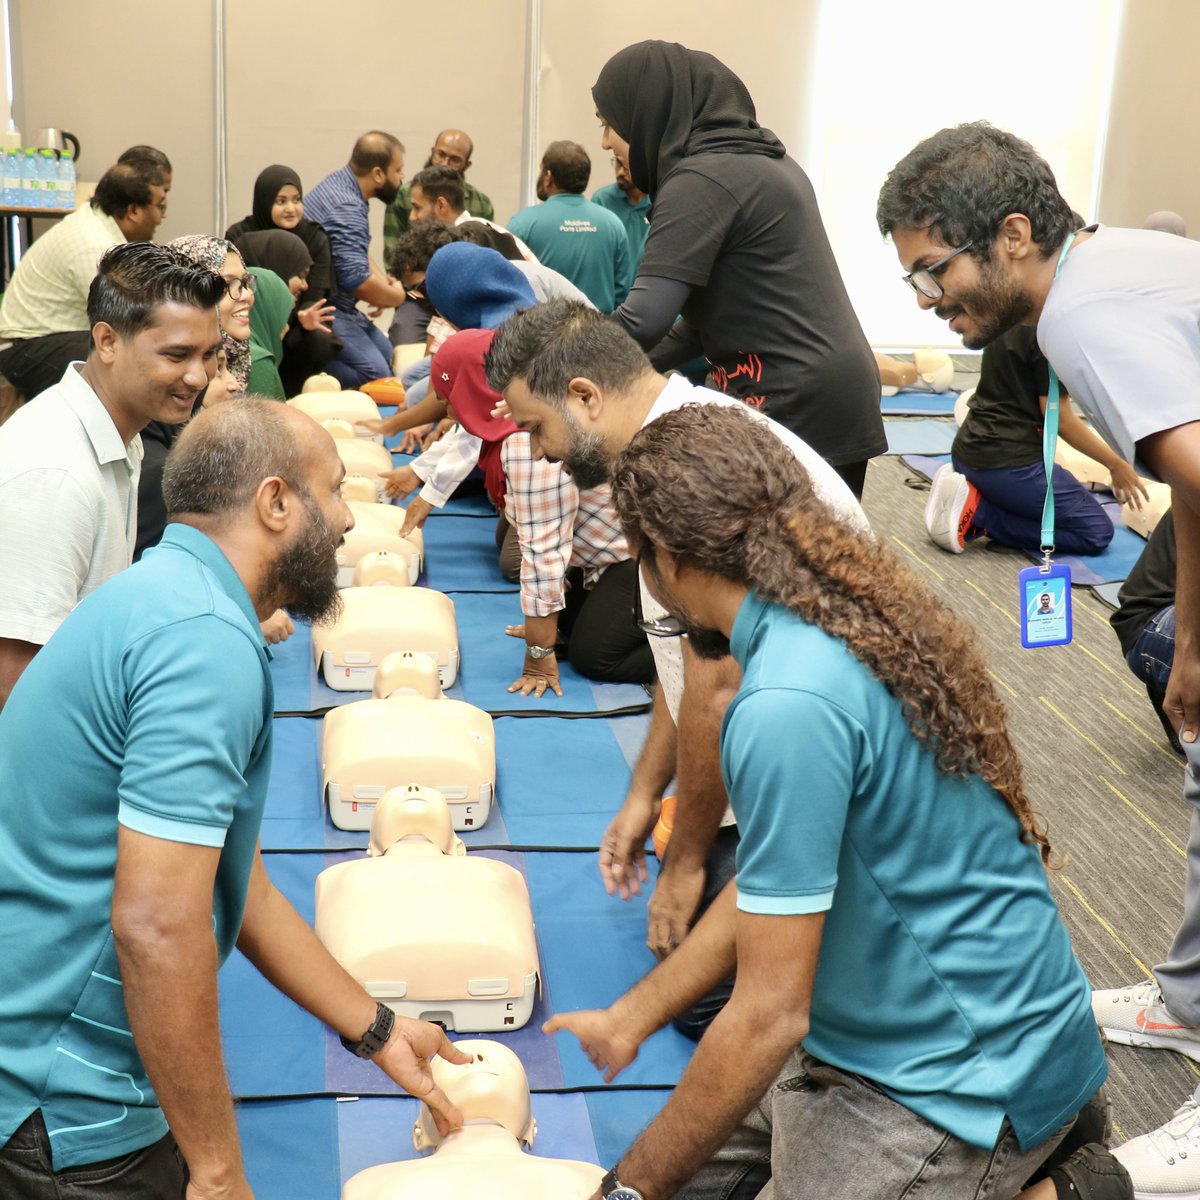 Department of Trauma & Emergency is celebrating the World Emergency Medicine Day which is officially marked on 27th of May. The department held a mass CPR event for staffs of government offices and state owned enterprises. This is the first of such series of planned events.